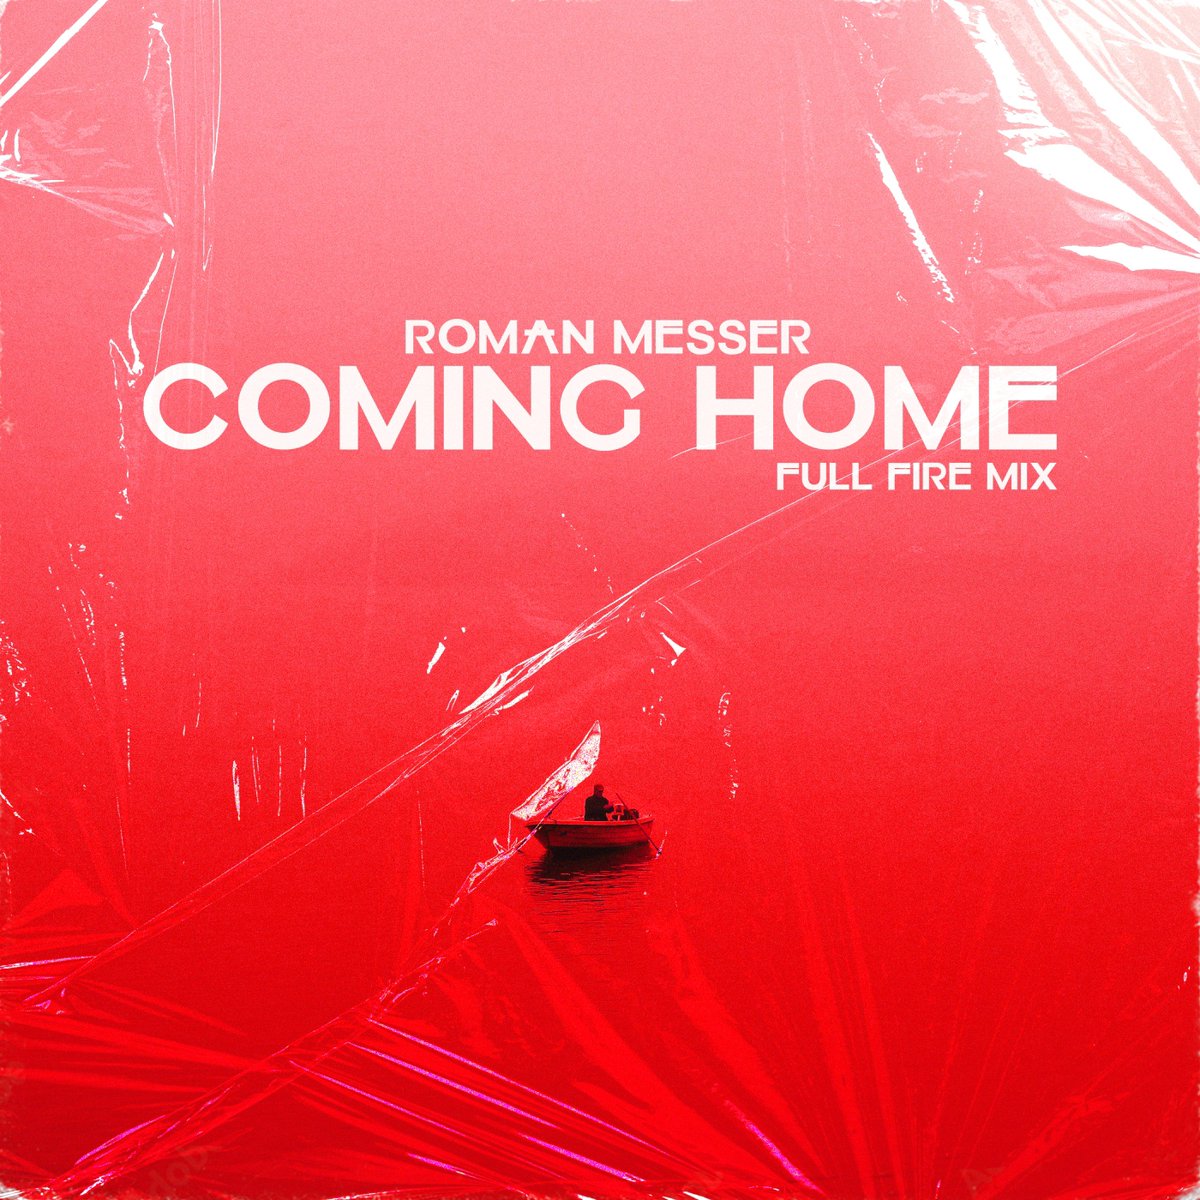 5- @RomanMesser - Coming Home (Full Fire Mix) [@suandamusic]

listen: listen.1mix.co.uk

#trance #trancefamily #NowPIaying @1mixTrance